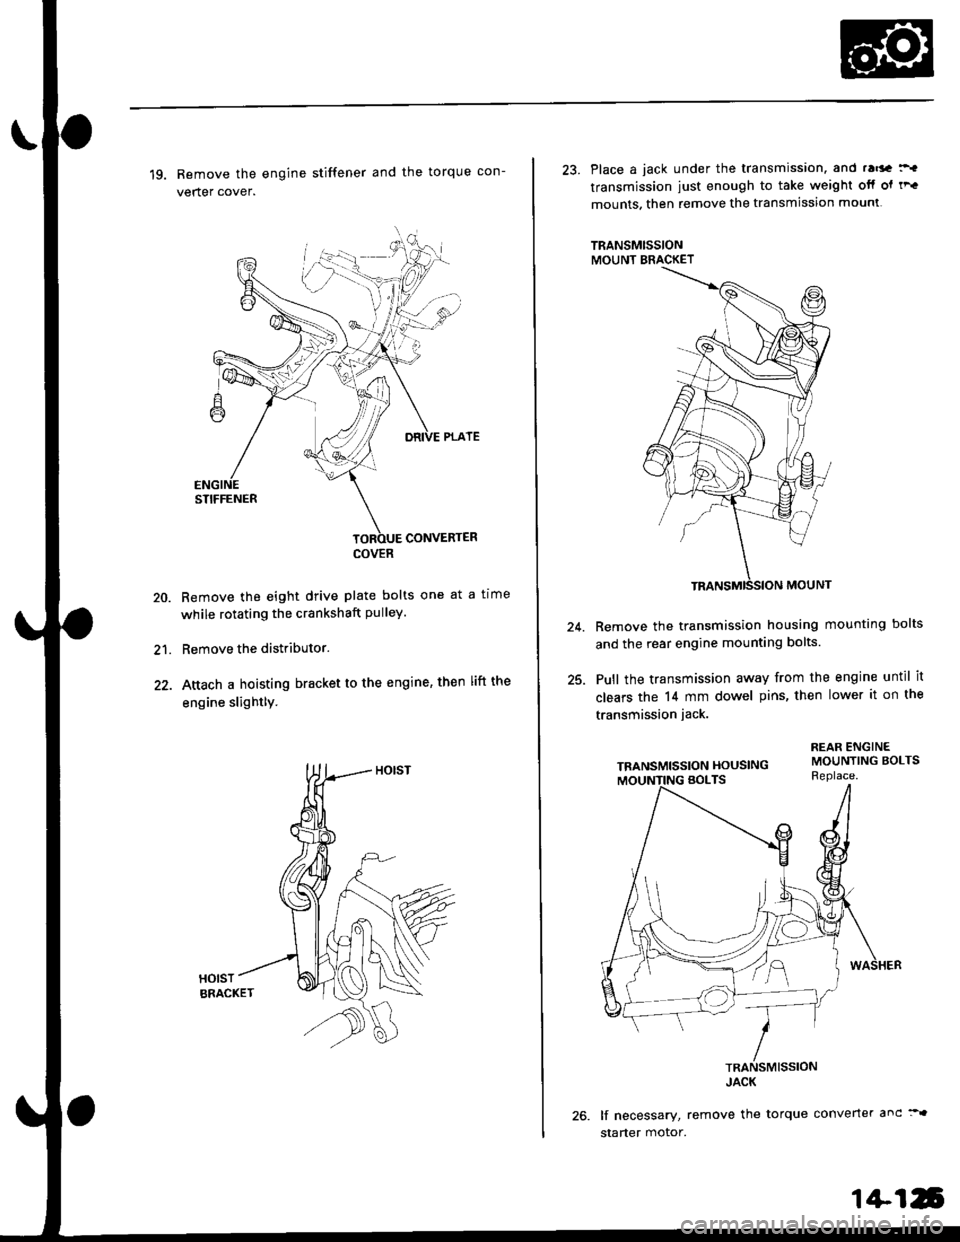 HONDA CIVIC 1997 6.G Service Manual 19. Remove the engine stiffener and the torque con-
verter cover.
Remove the eight drive plate bolts one at a tlme
while rotating the crankshaft pulley.
Remove the distributor.
Attach a hoisting brack